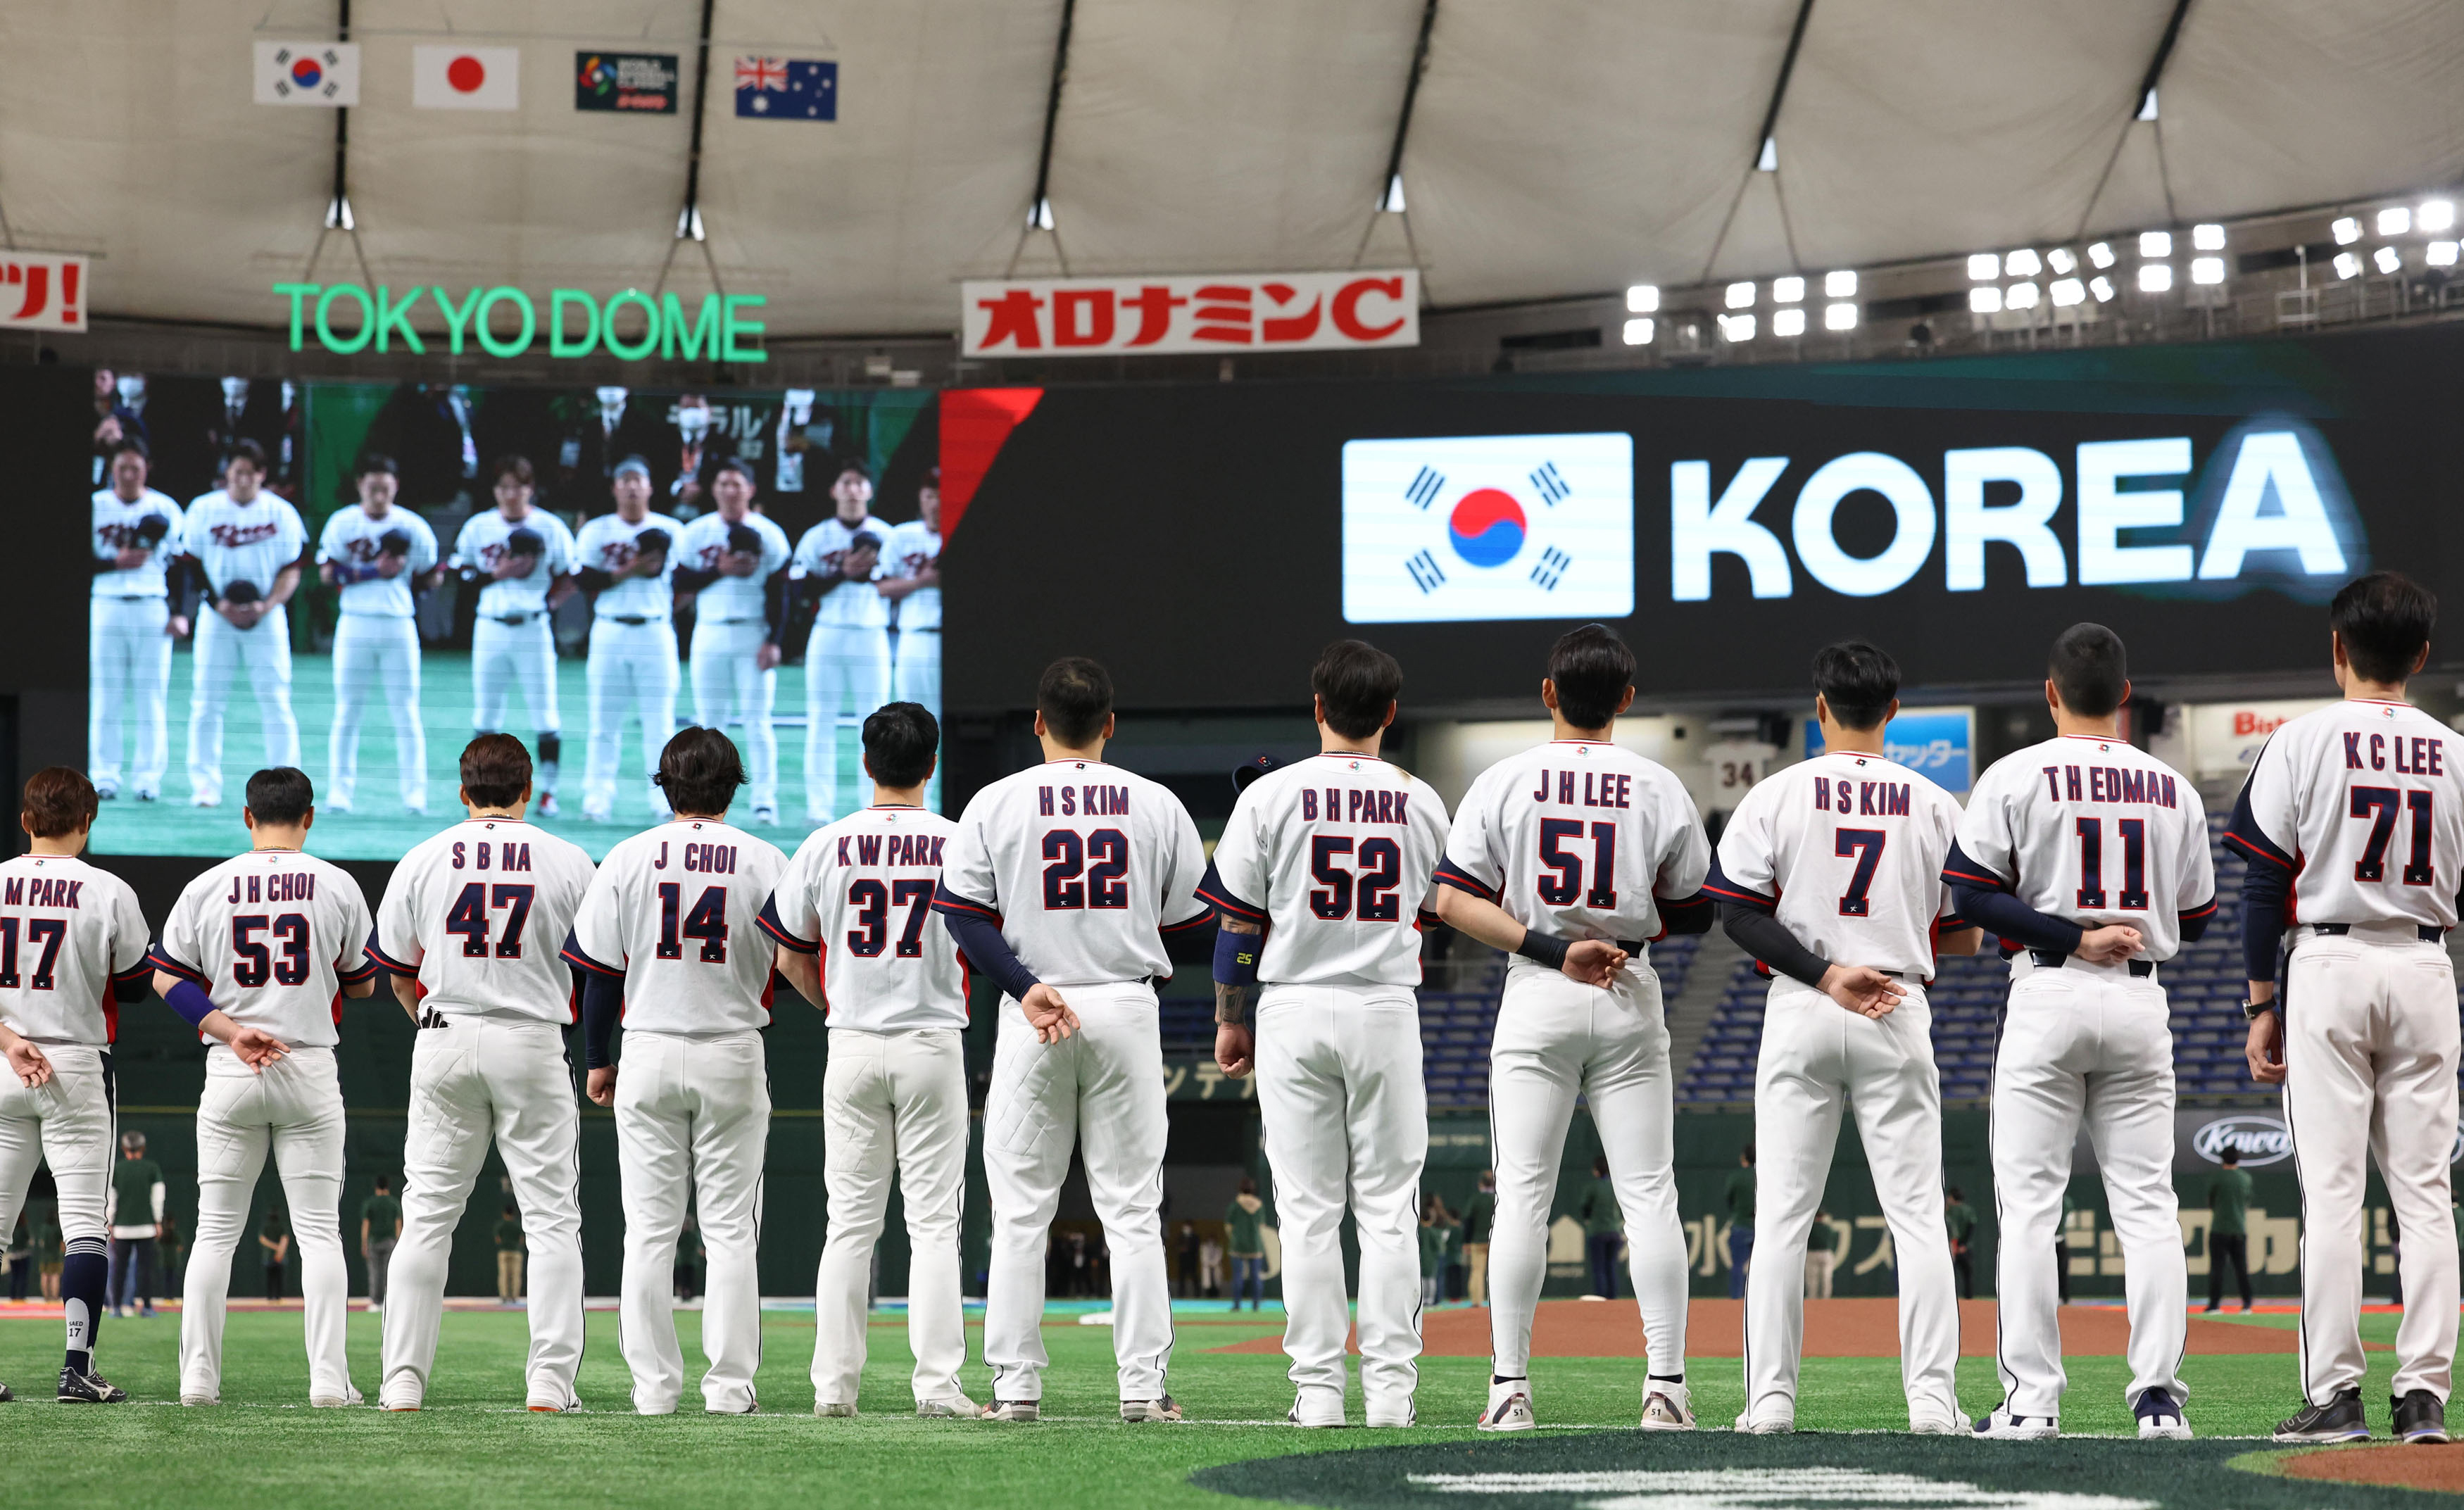 Korean baseball is in big trouble; no  criticism or encouragement, reflected  the cold hearts of baseball fans